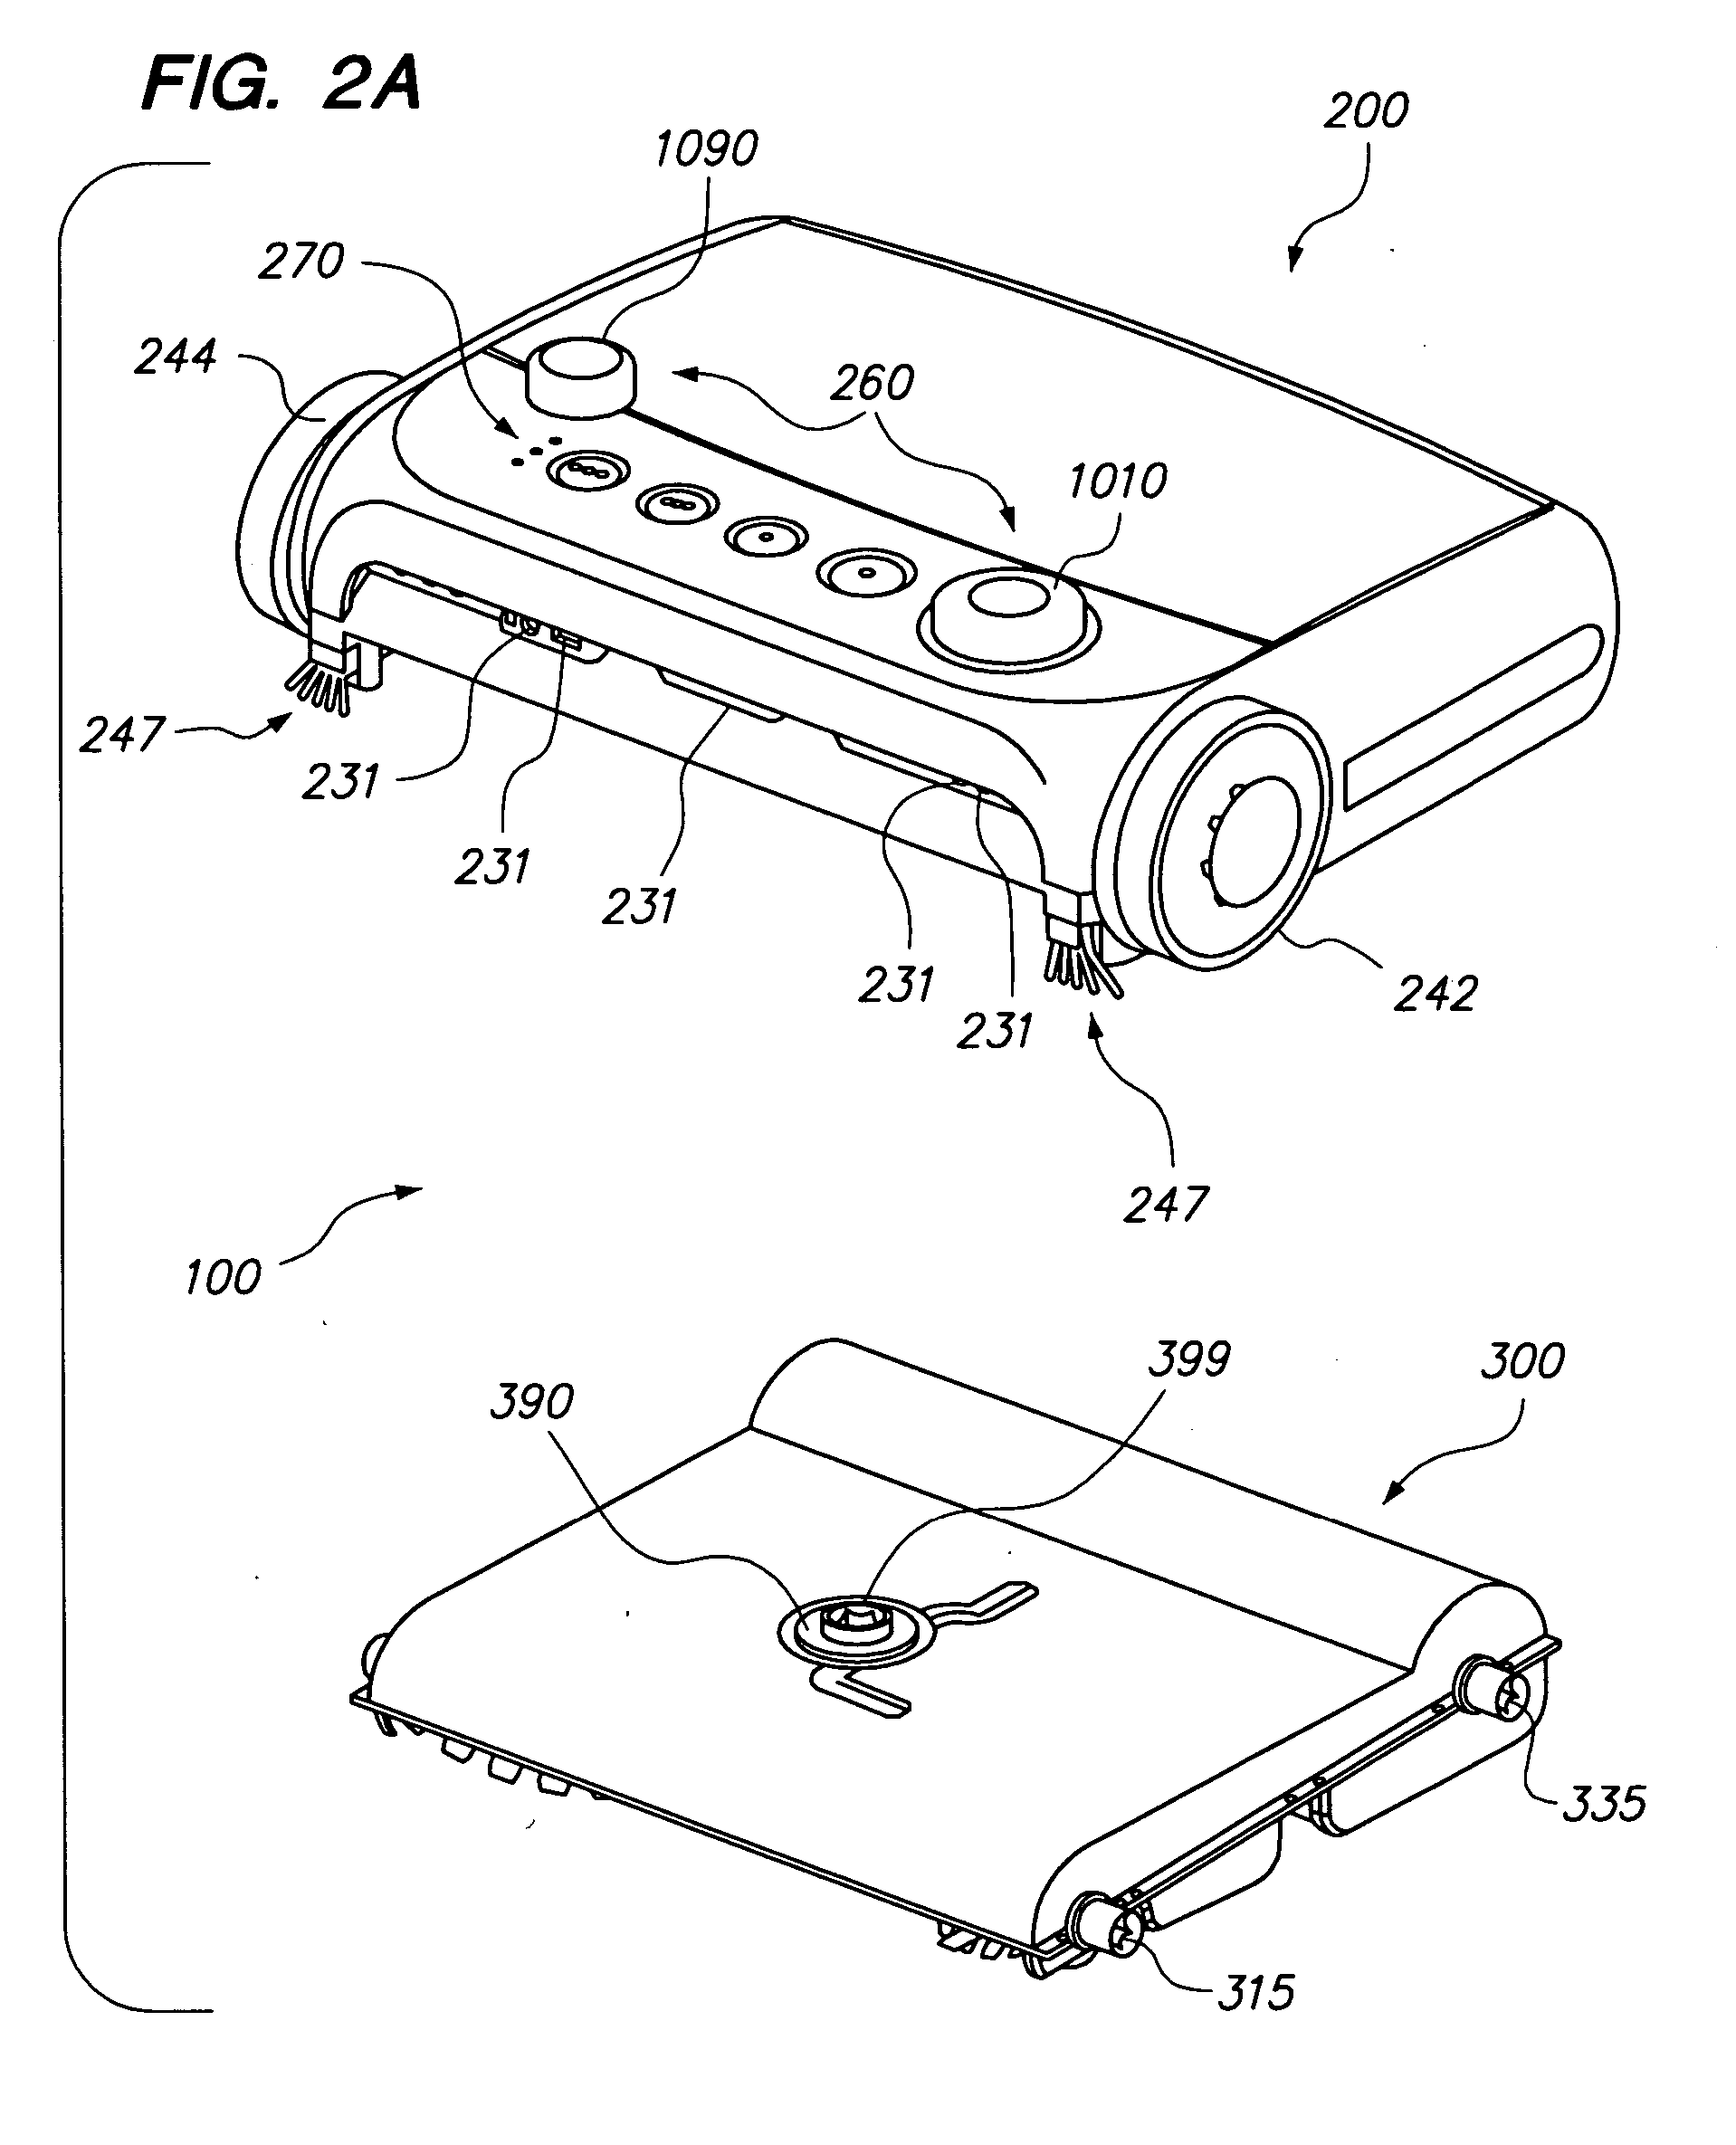 Localization and mapping system and method for a robotic device